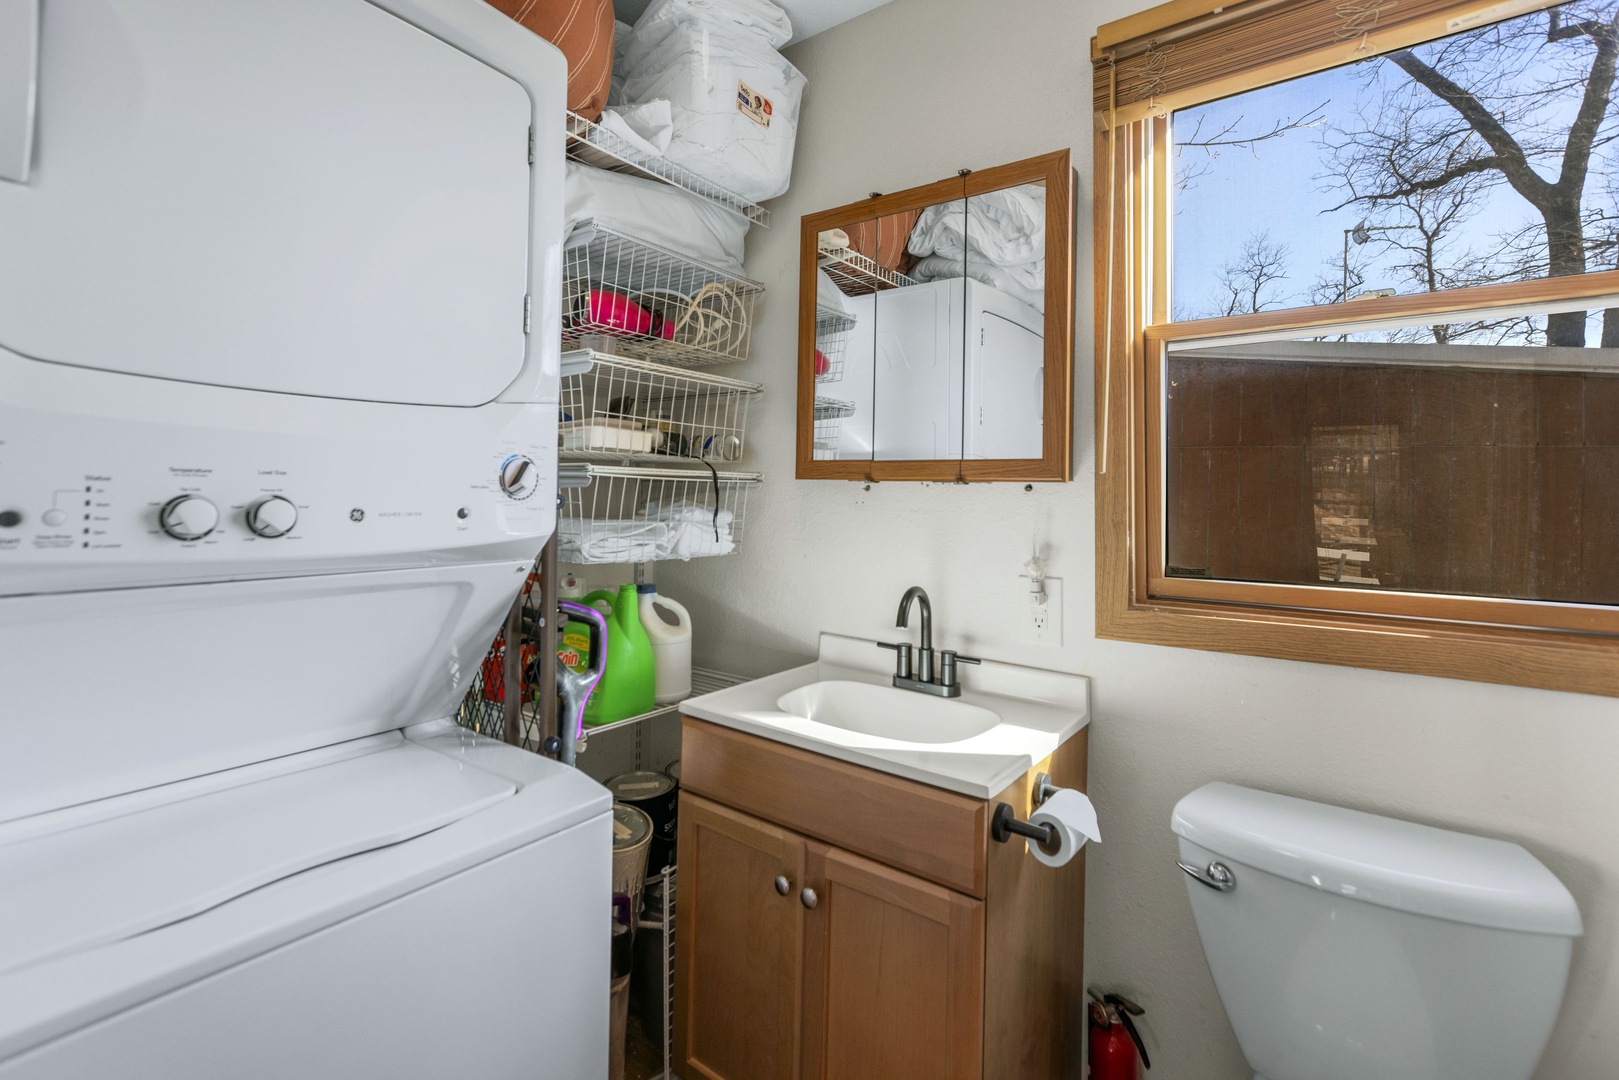 Little Bear - A half bath with laundry is available off the main living area